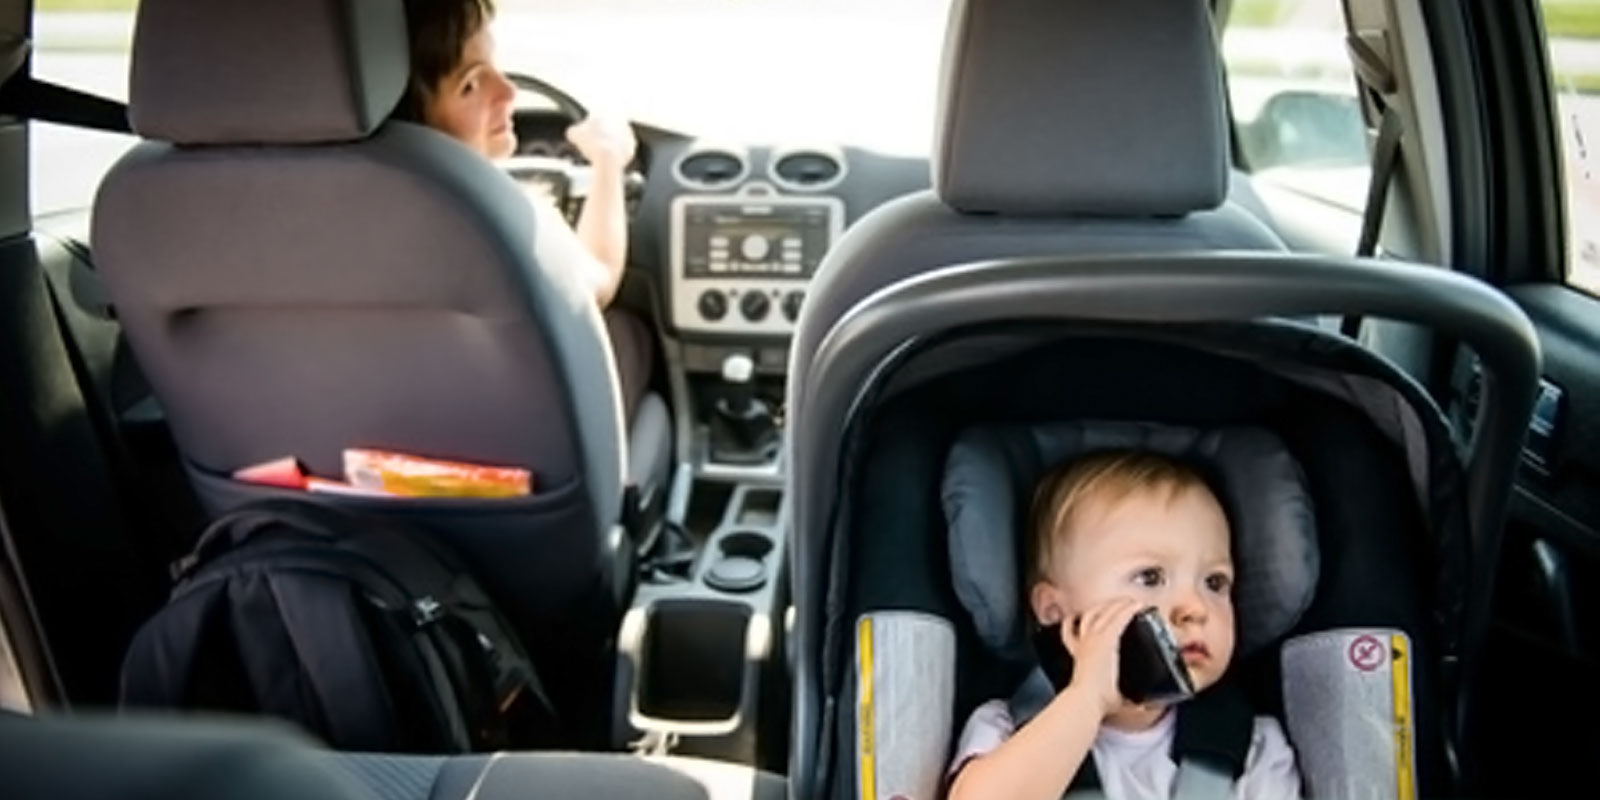 Registering Your Child's Car Seat is Very Important